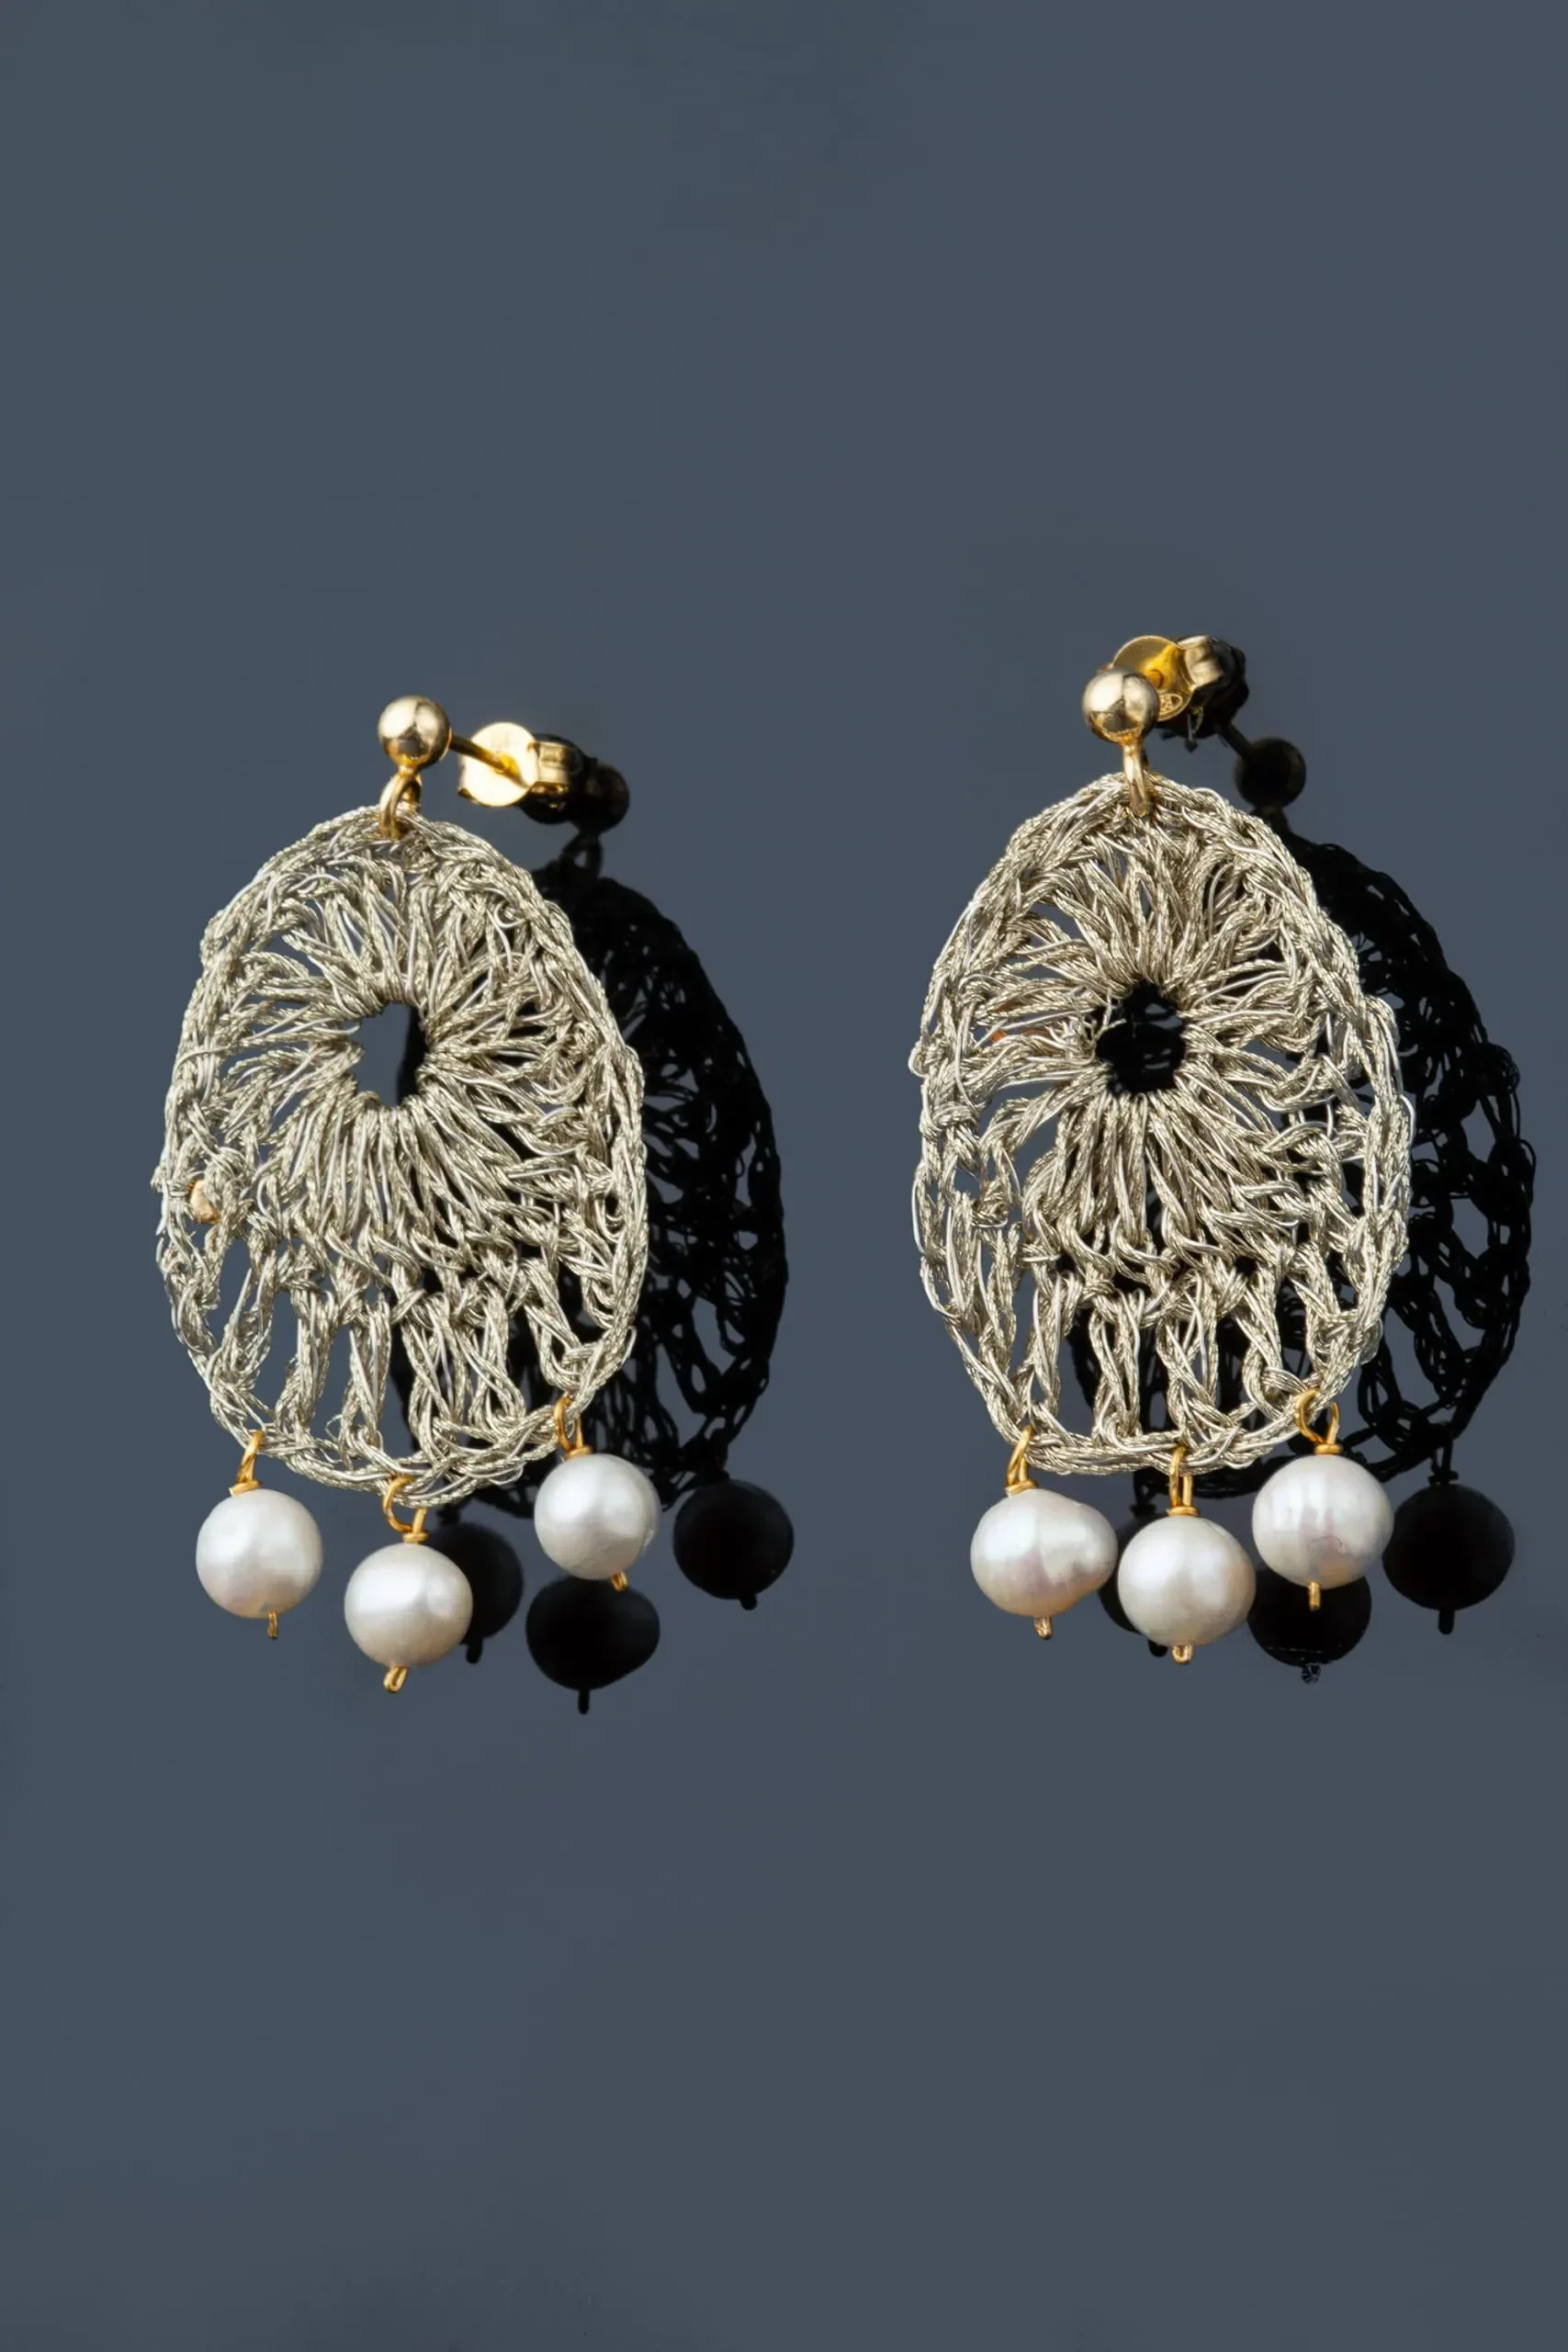 Handmade Jewellery | Crochet knit silver earrings with golden threads and pearls gallery 1